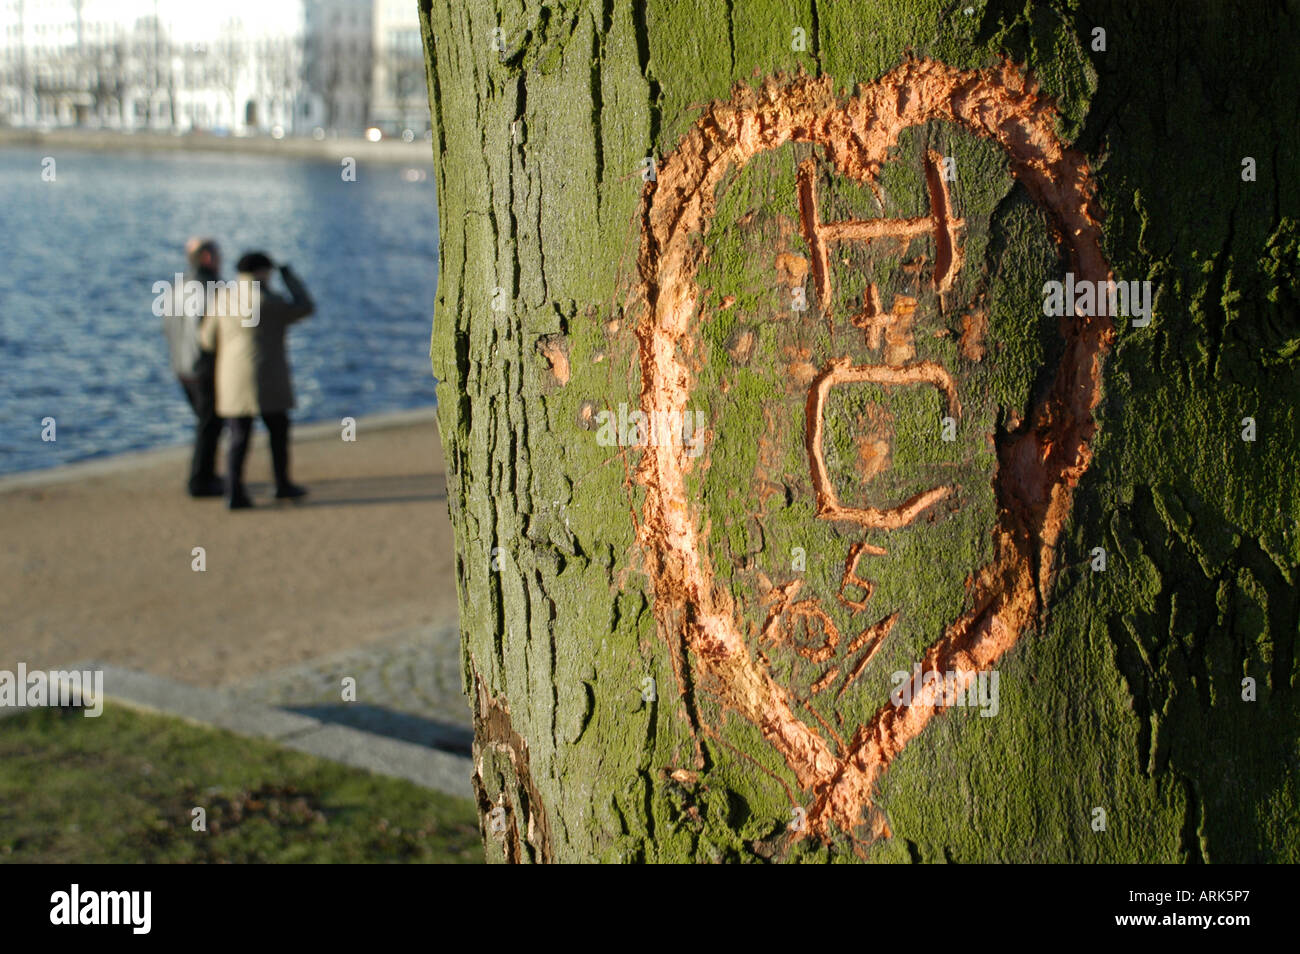 A heart with initials carved in a tree. Stock Photo